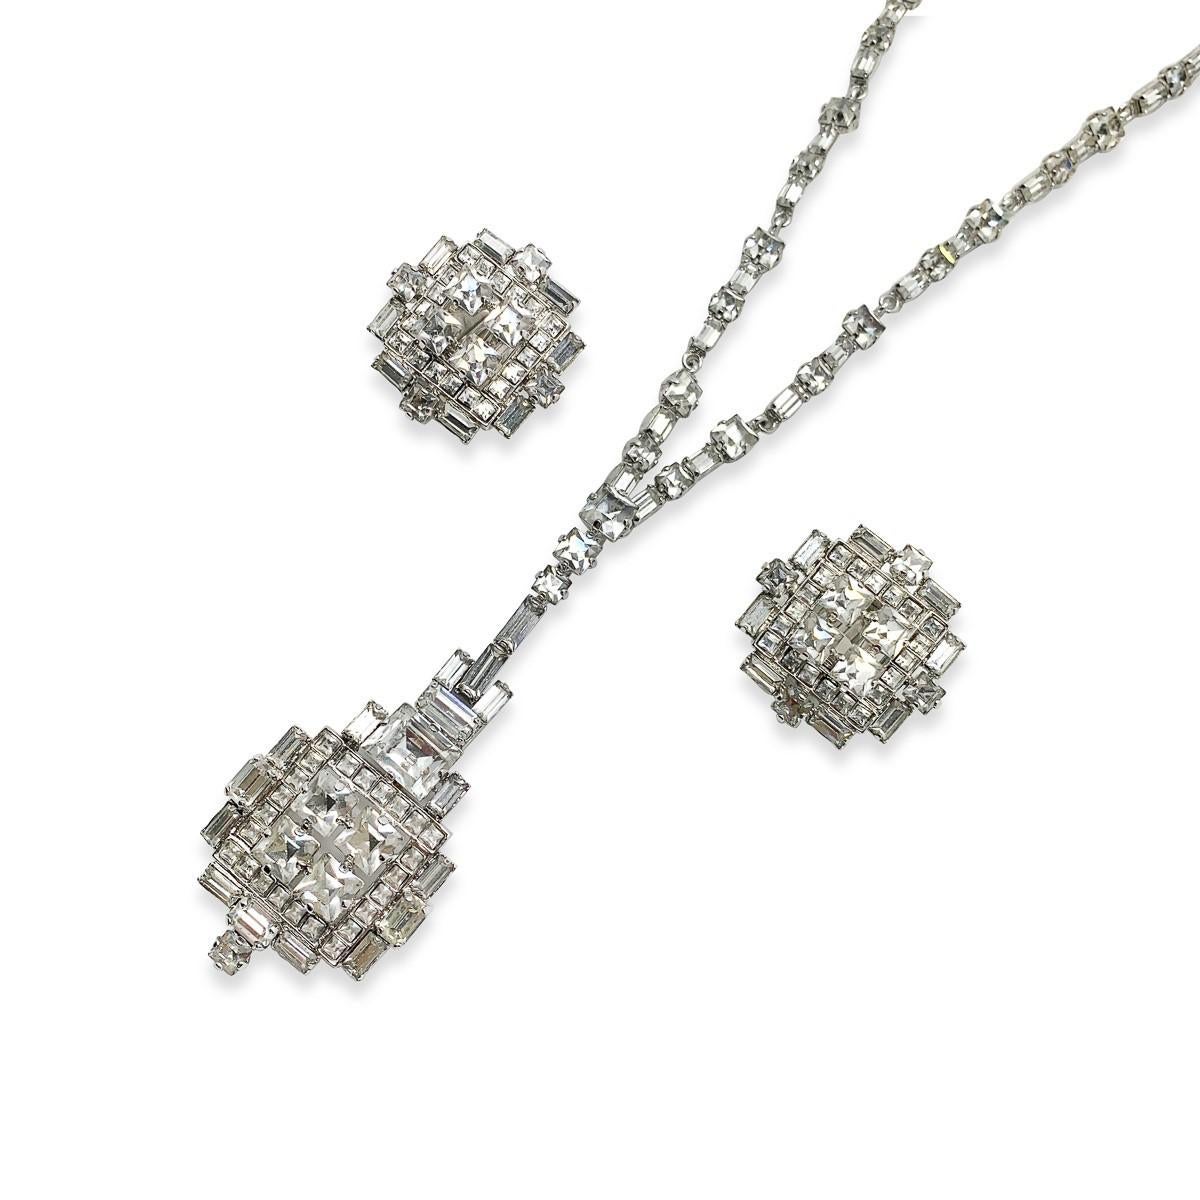 Exquisite Vintage Christian Dior Art Deco Cocktail Necklace & Earrings 1970s For Sale 1